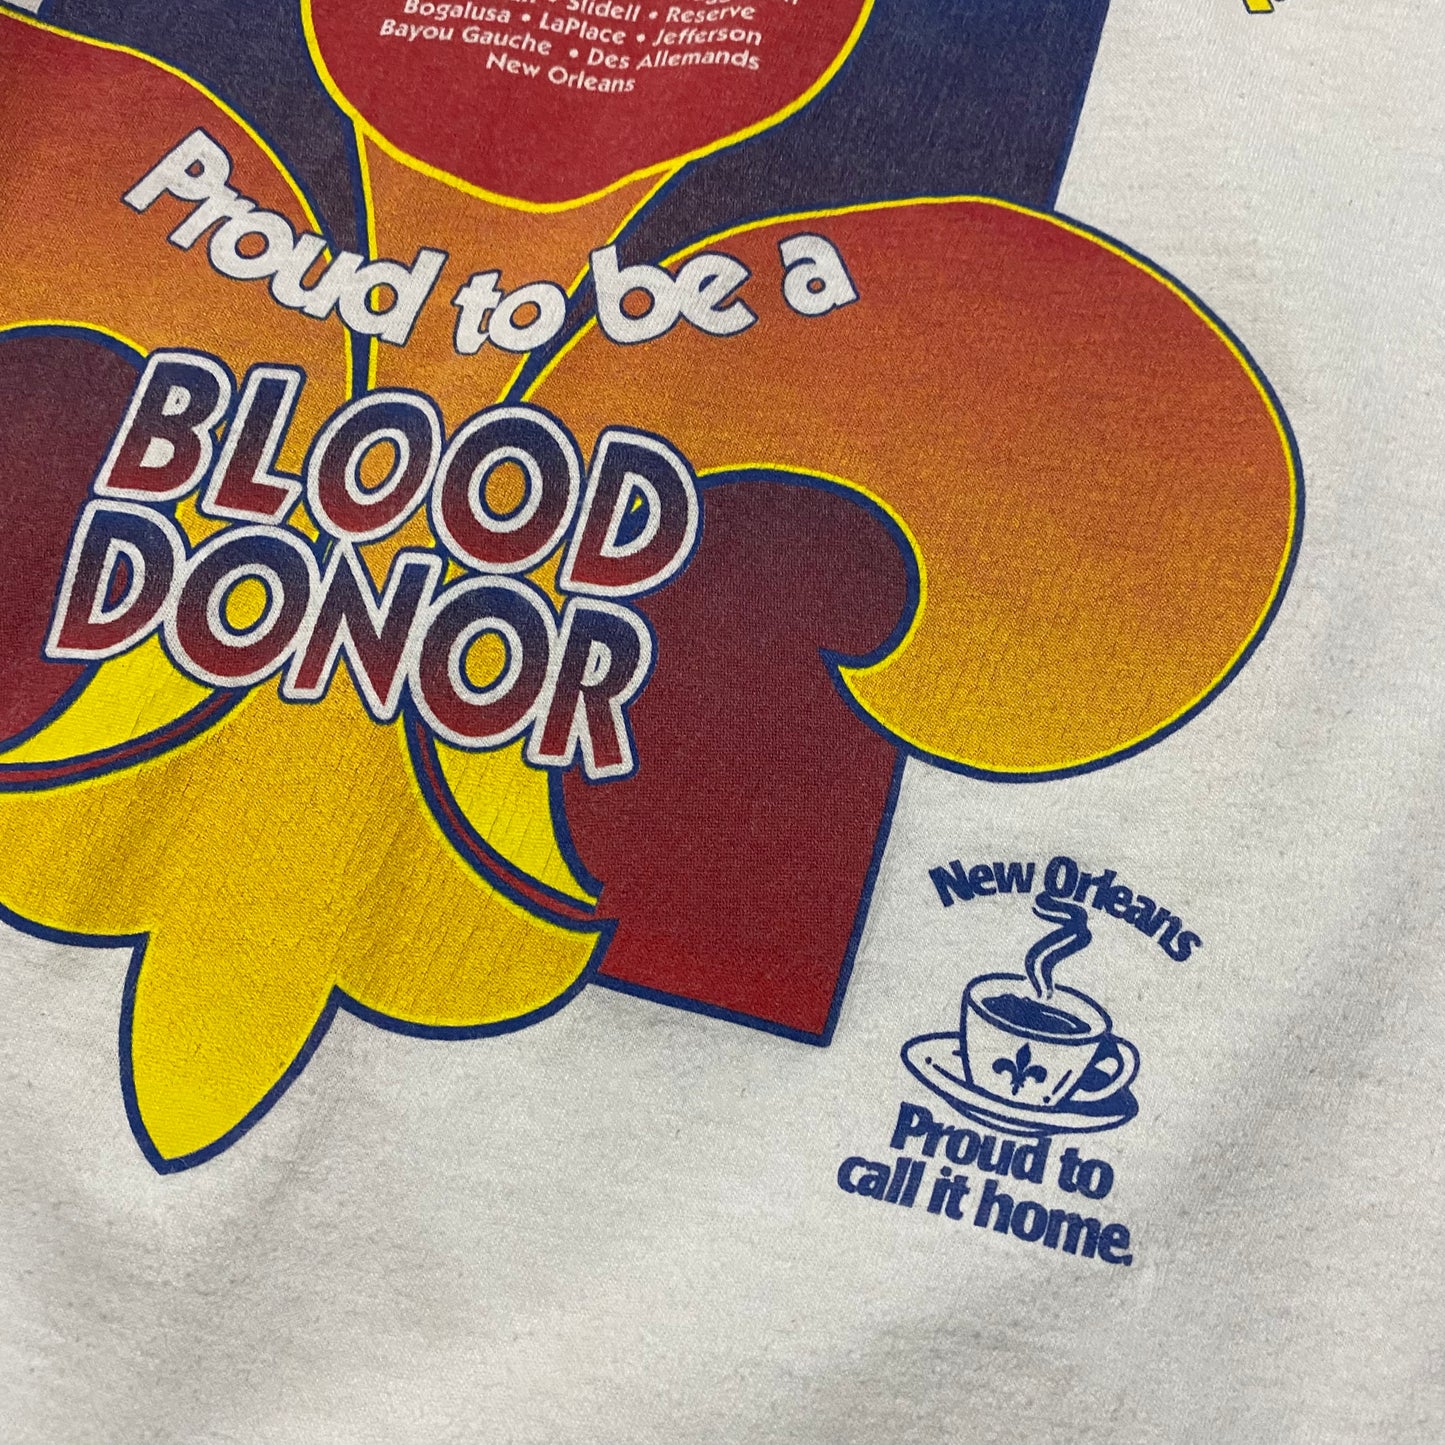 90's OCHSNER BLOOD BANK "PROUD TO BE A BLOOD DONOR" T-SHIRT